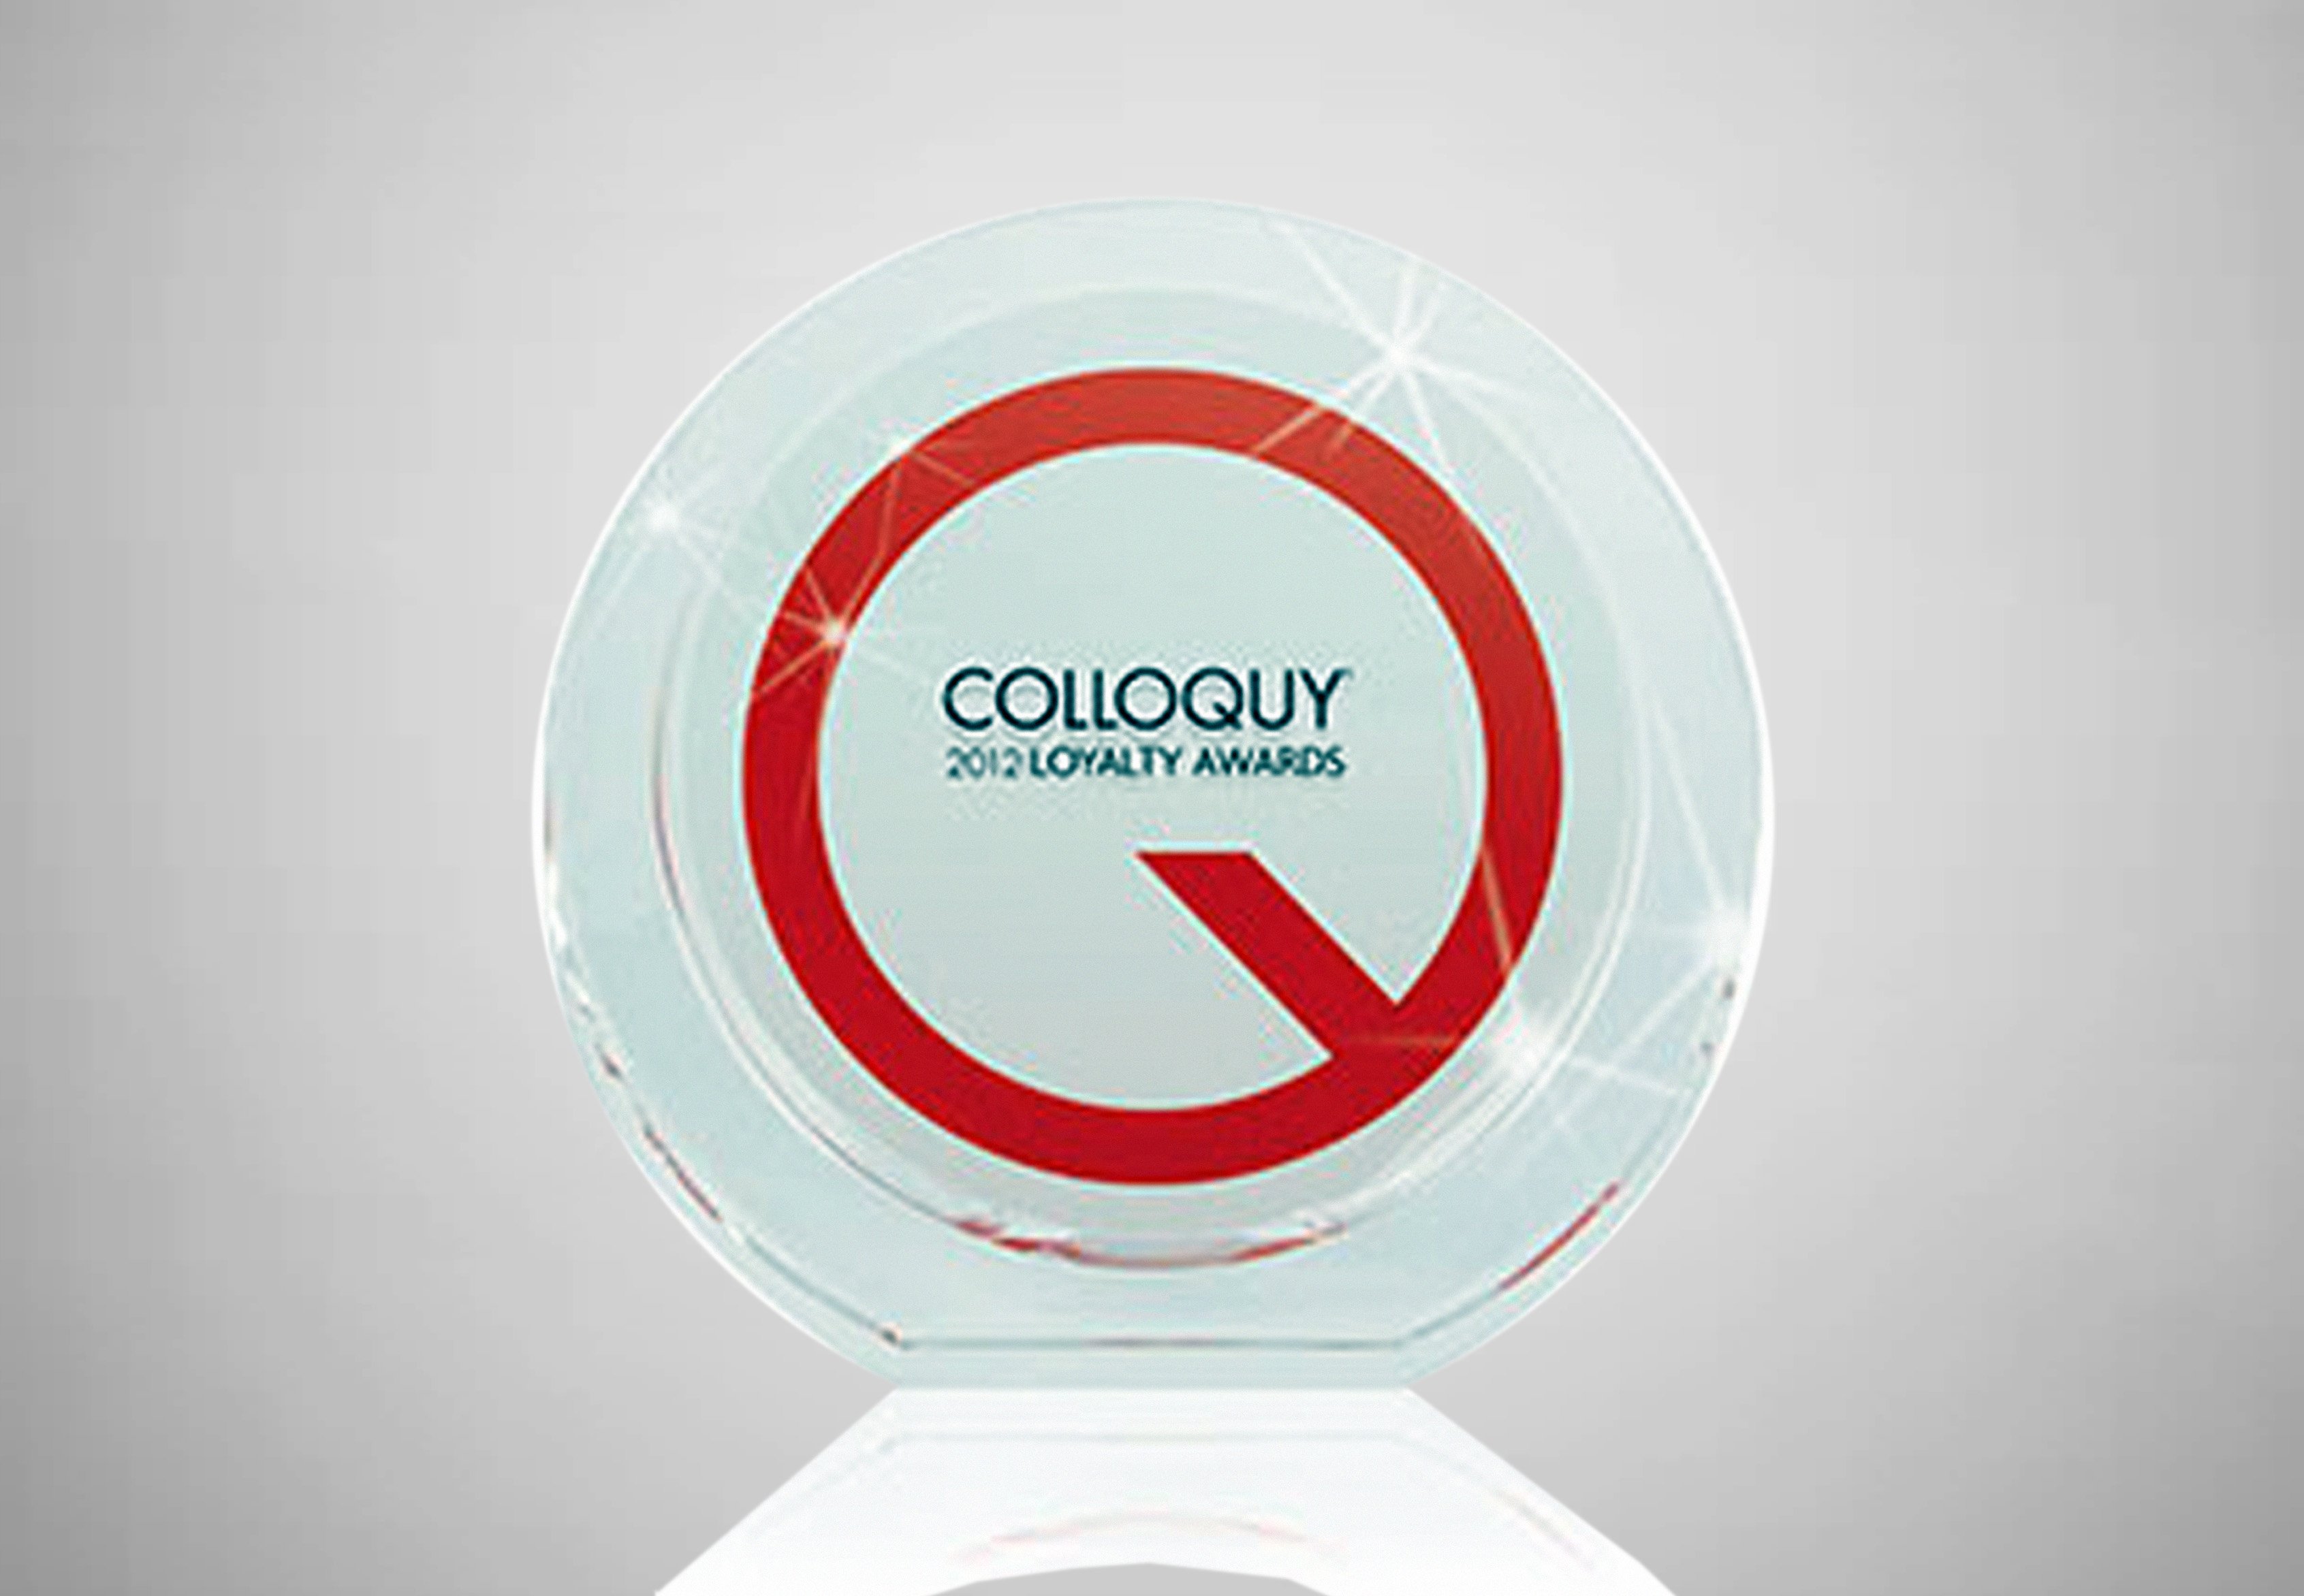 COLLOQUY Loyalty Awards 2012